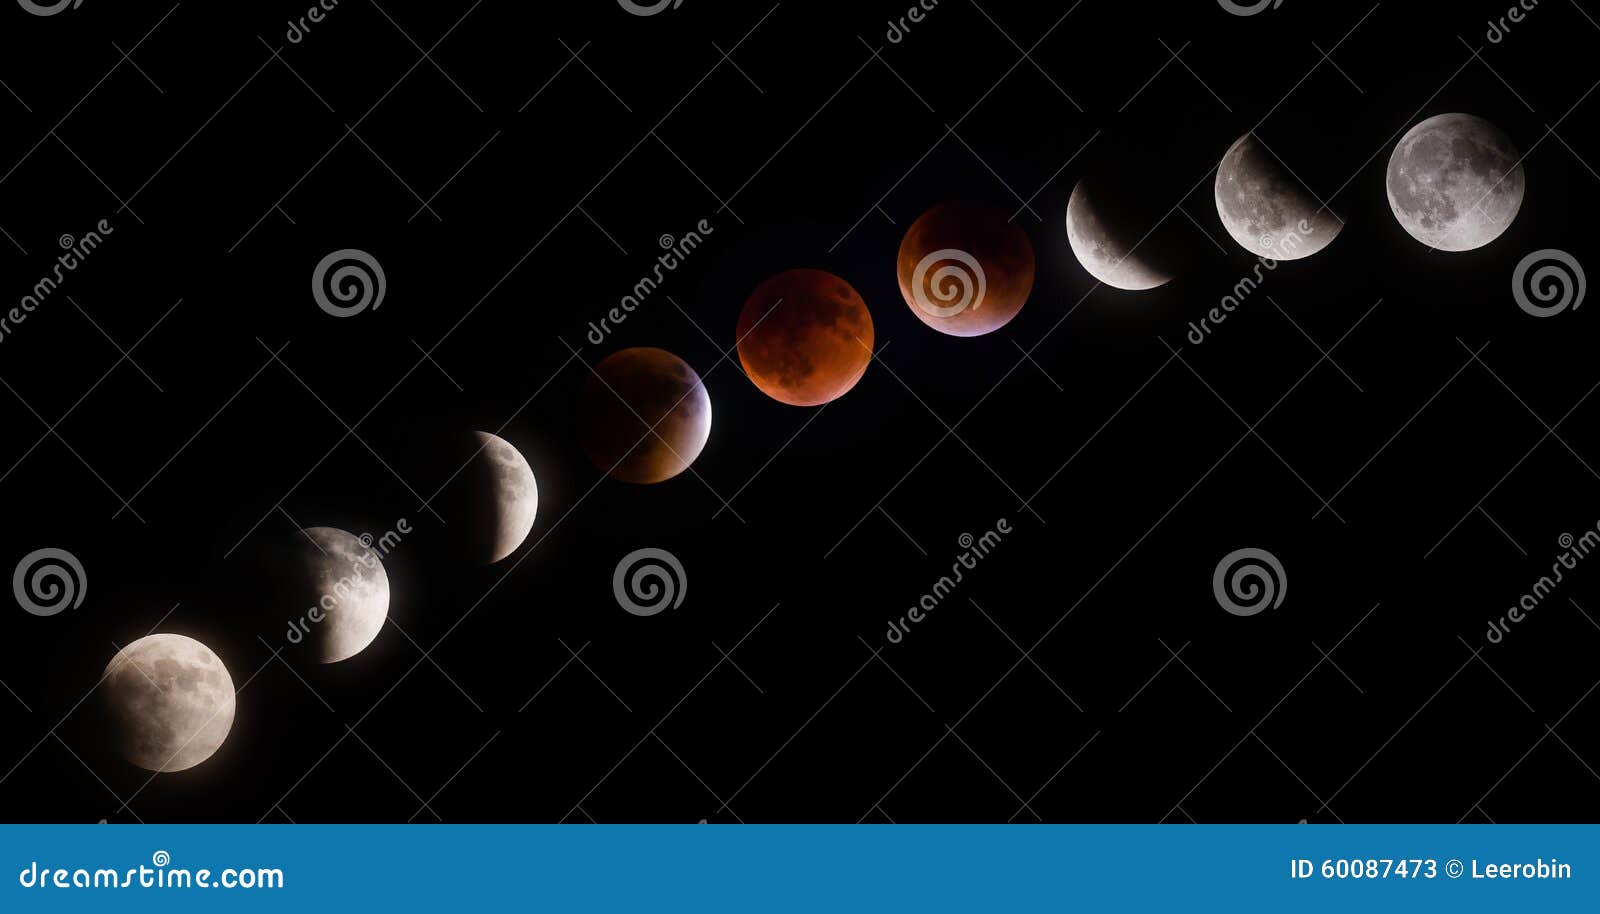 phases of supermoon lunar eclipse